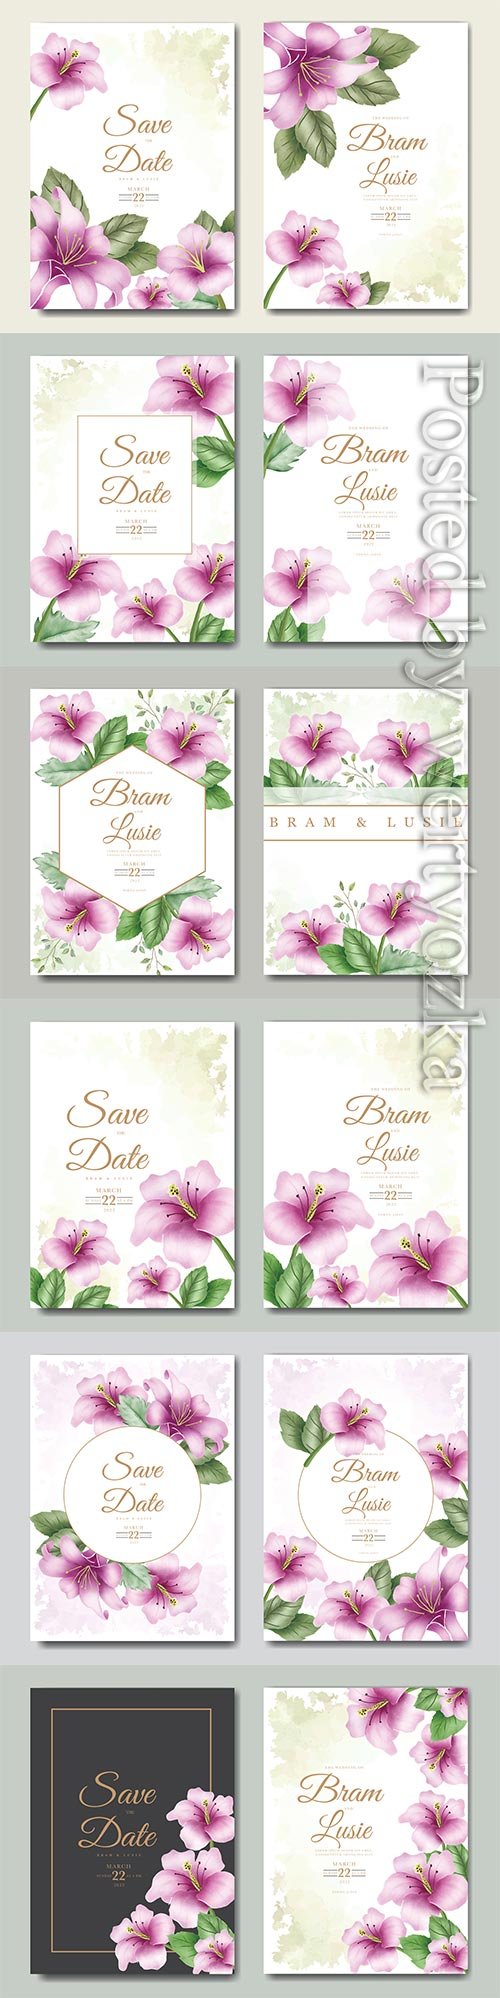 Wedding invitation card with beautiful flowers watercolor